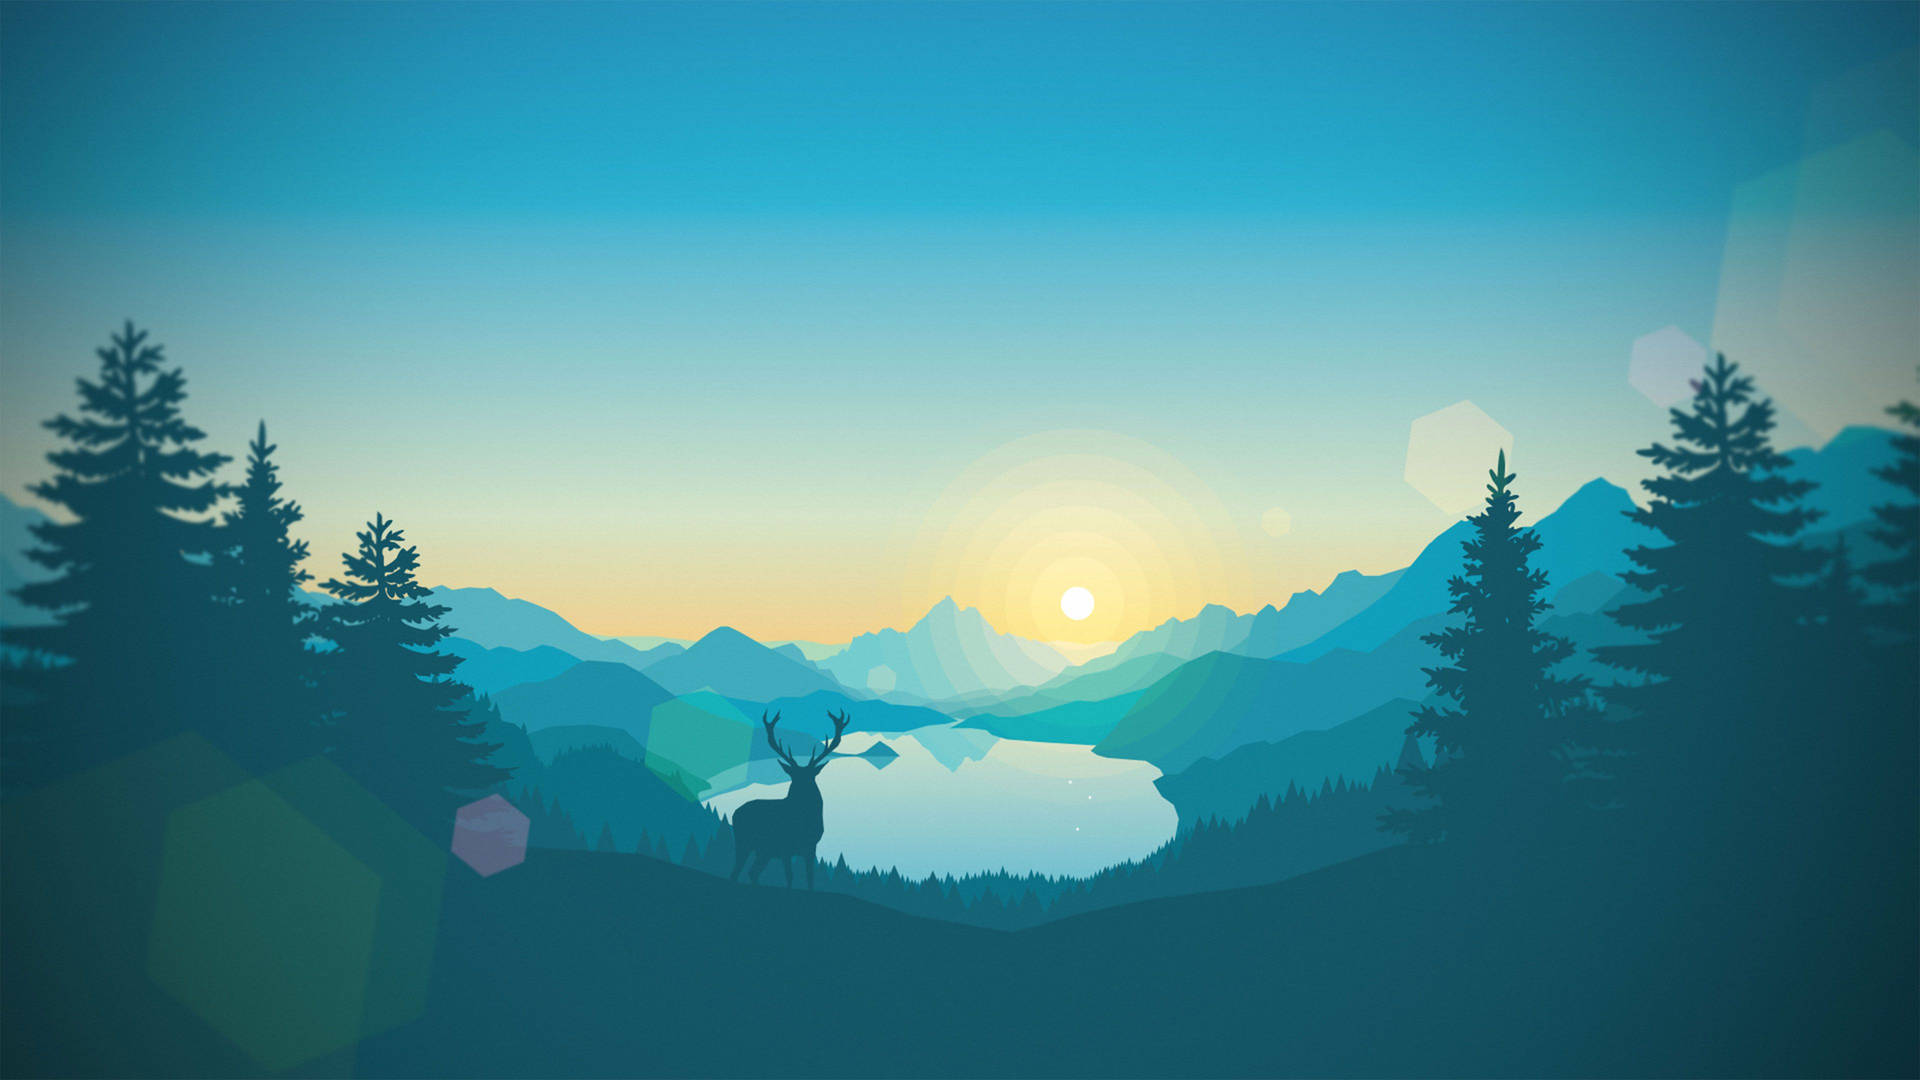 A Captivating Silhouette Of A Deer In A 4k, Blue Minimalist Landscape Background